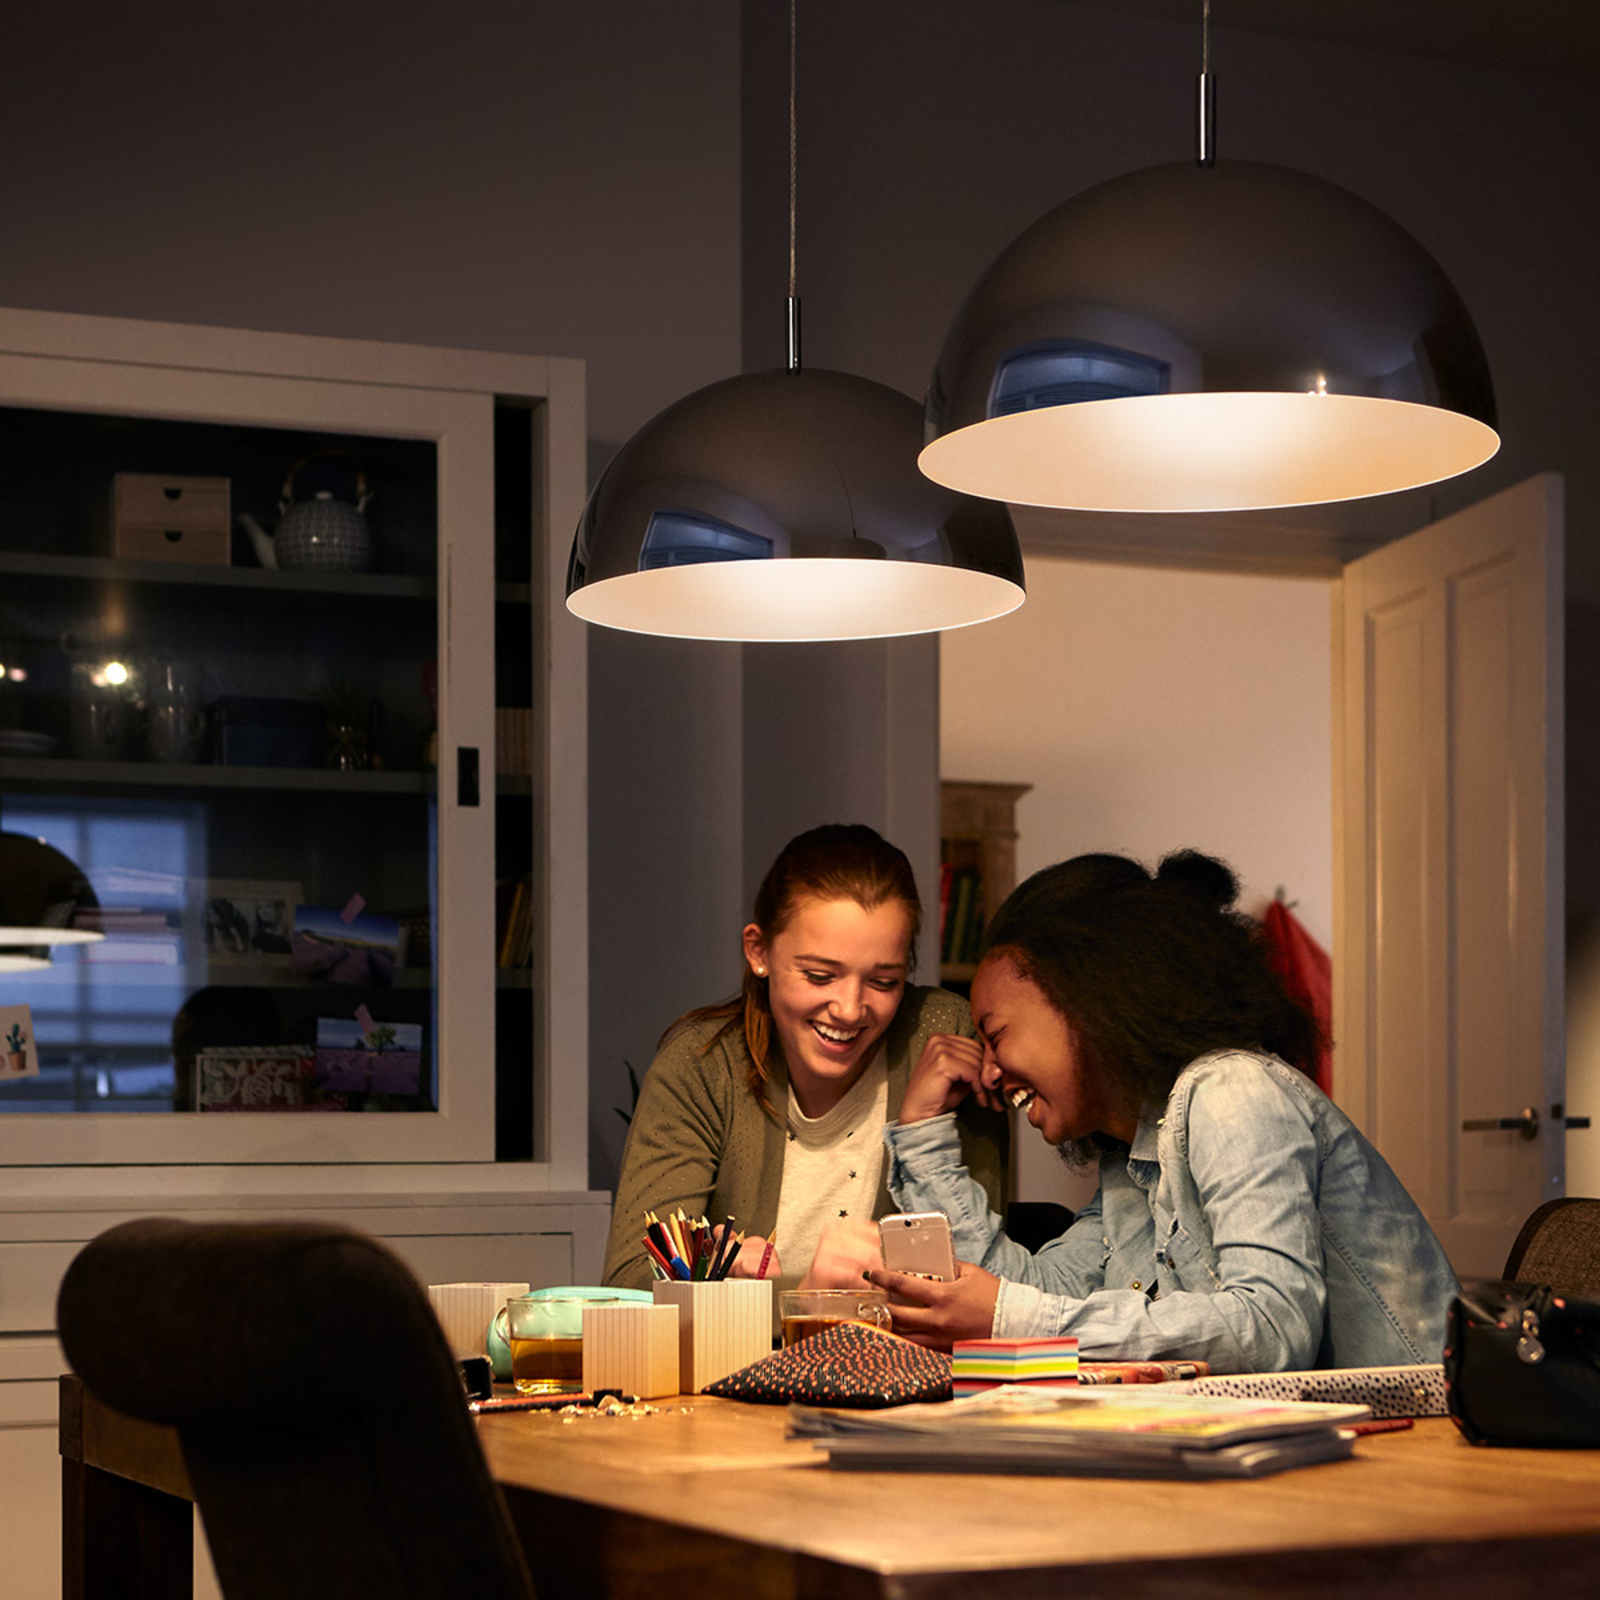 Philips LED druppellamp E27 2,2W, warmwit, opaal